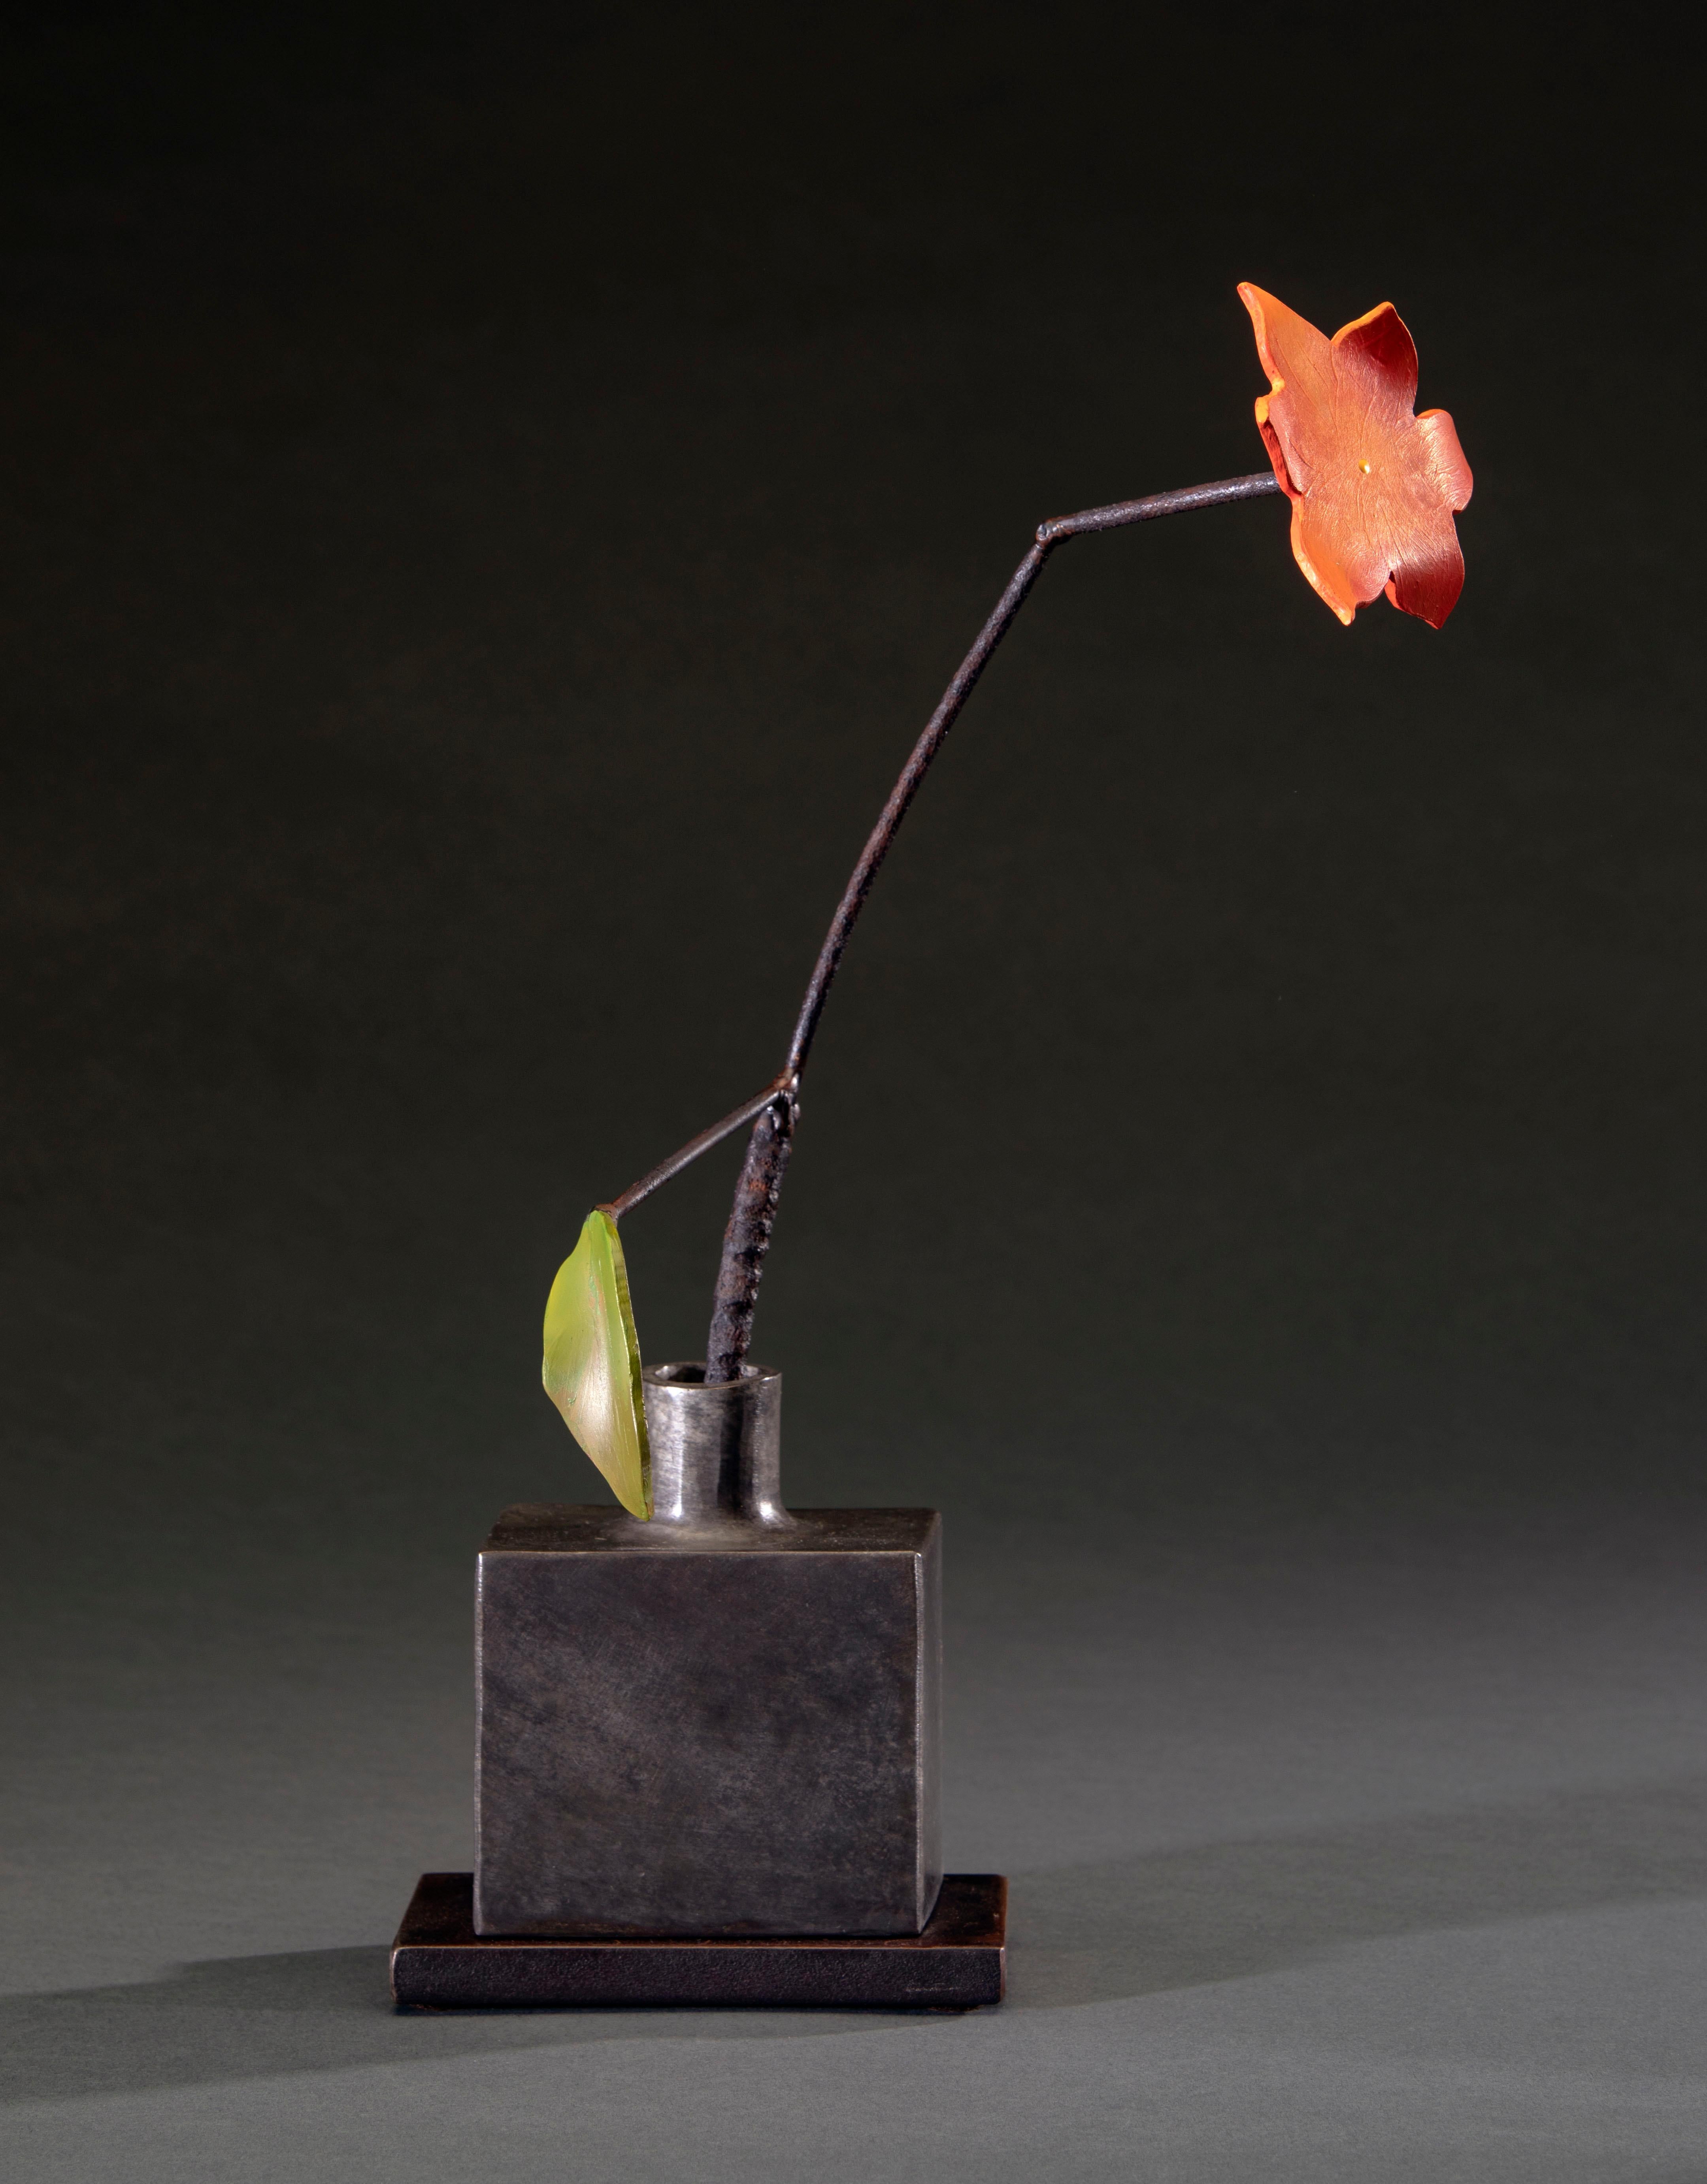 'Silver Bottle Orange Flower' by David Kimball Anderson, 2022. Bronze, steel, and paint, 18 x 10 x 5 in. This sculpture features a  square vase cast in bronze and finished with a grey patina. It features a steel flower painted in bright orange and a